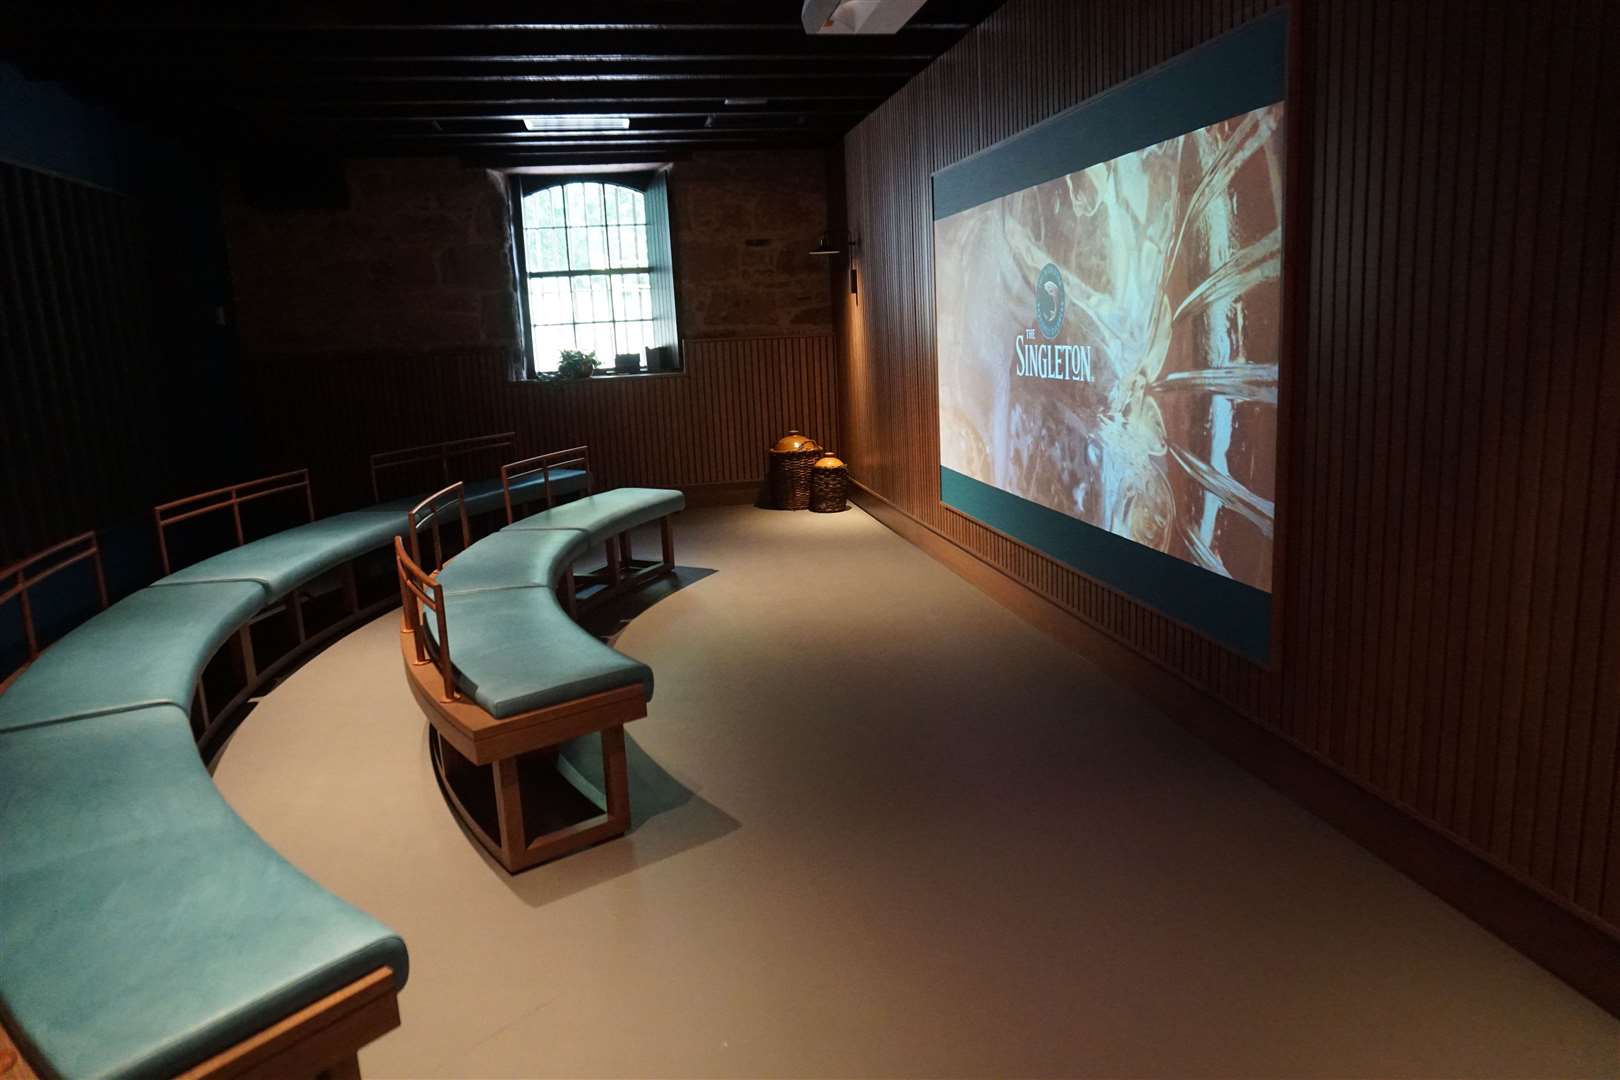 The new video room in the visitor centre. Picture by: Federica Stefani.